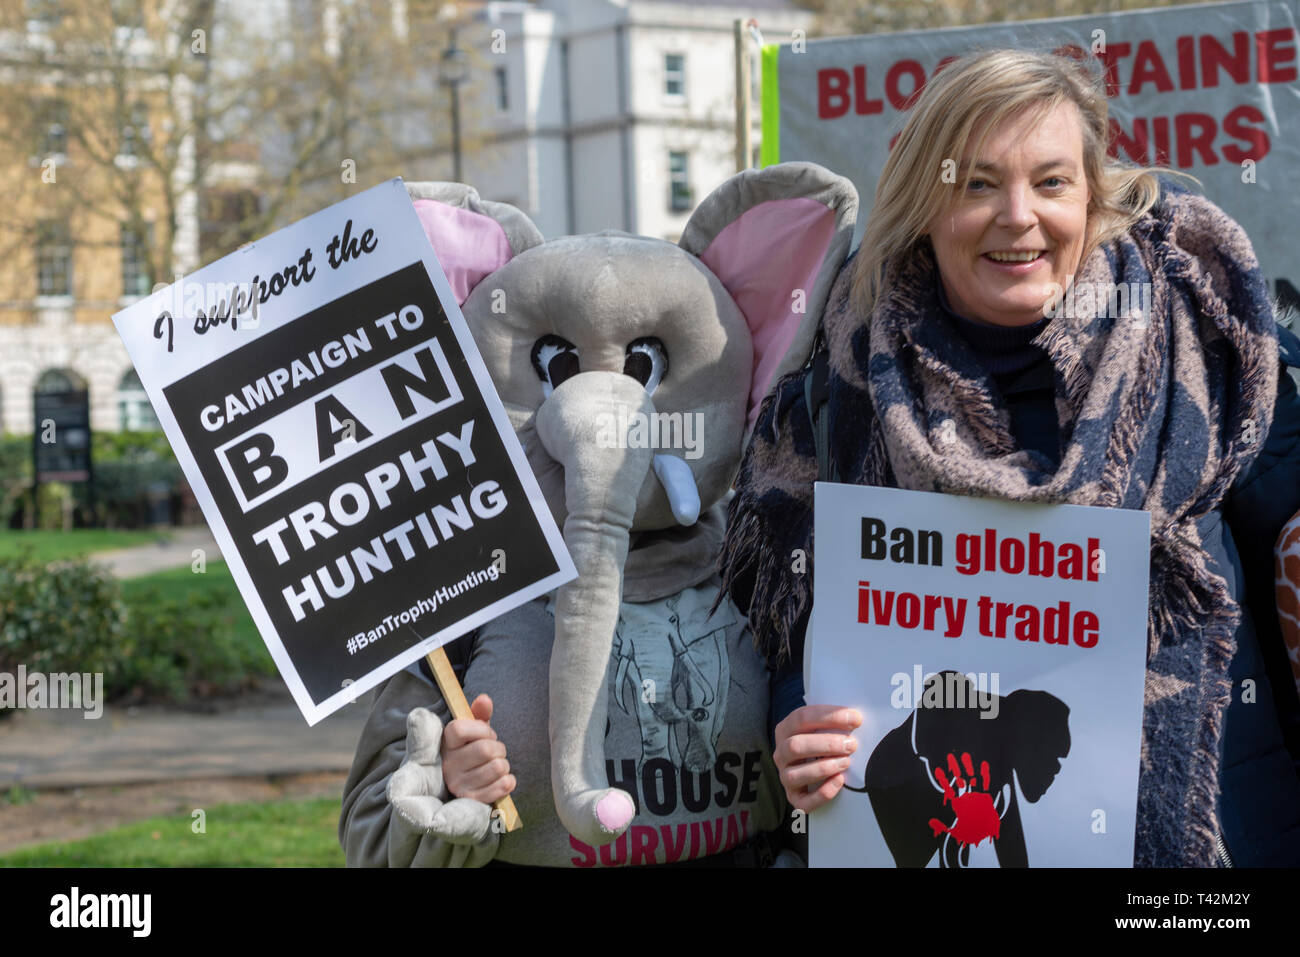 Protest march taking place in London demonstrating against the threat of extinction of wildlife and highlighting the act of trophy hunting in particular of elephants and rhinos. It is part of the 5th global march for elephants and rhinos and is timed to take place before a conference in Sri Lanka calling to uplist elephants to Appendix I Stock Photo